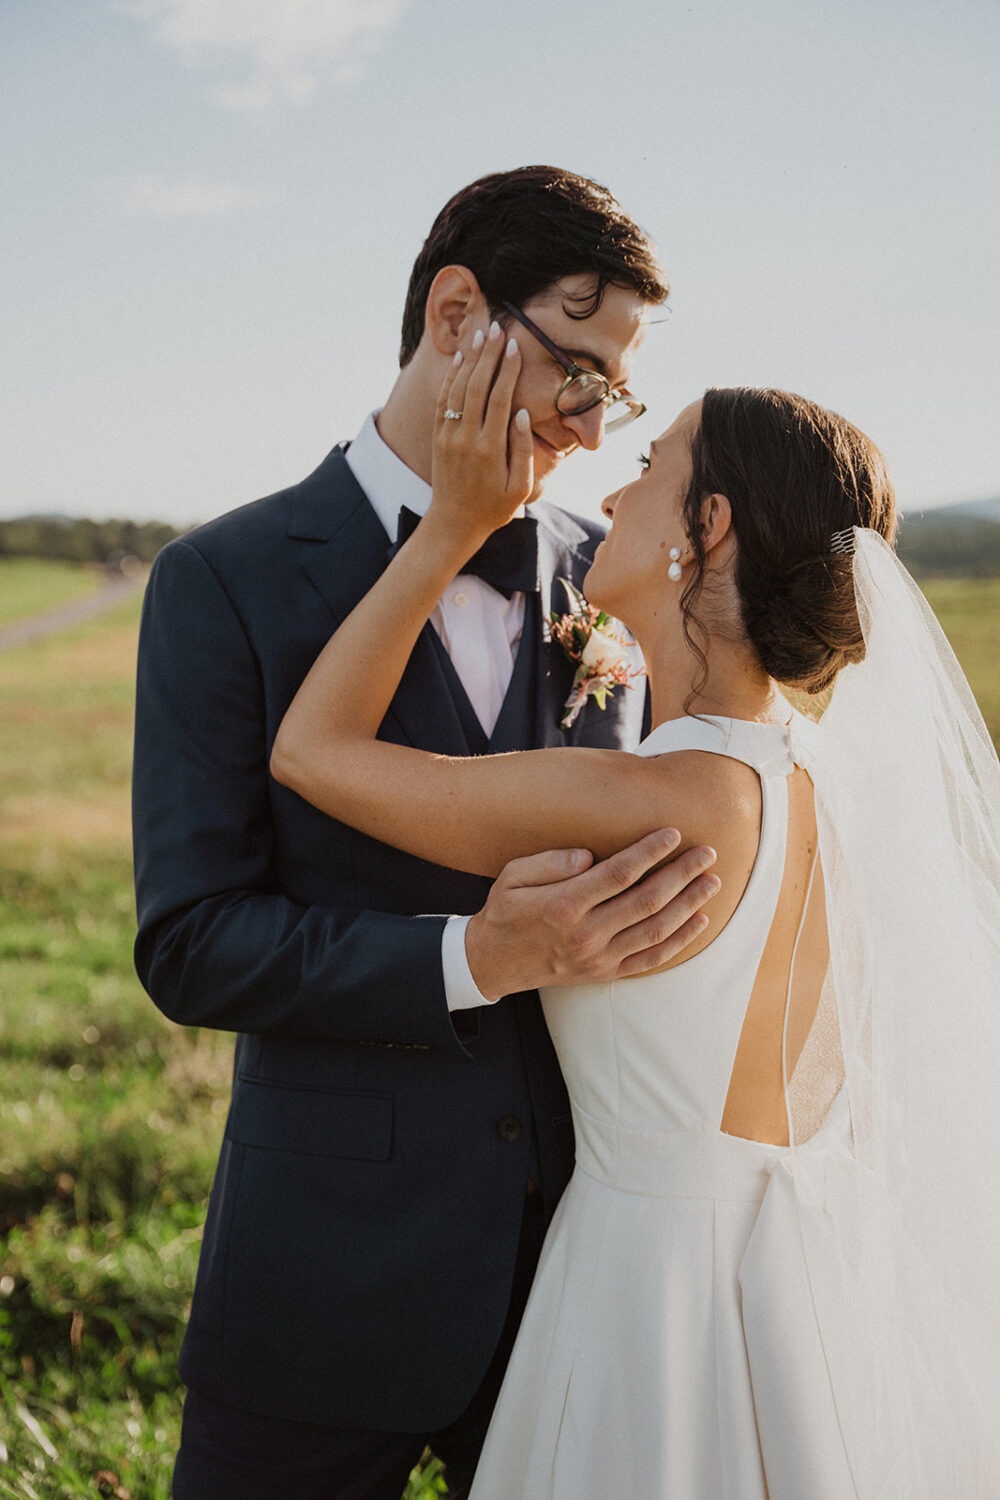 couple embraces at sunset during outdoor wedding 